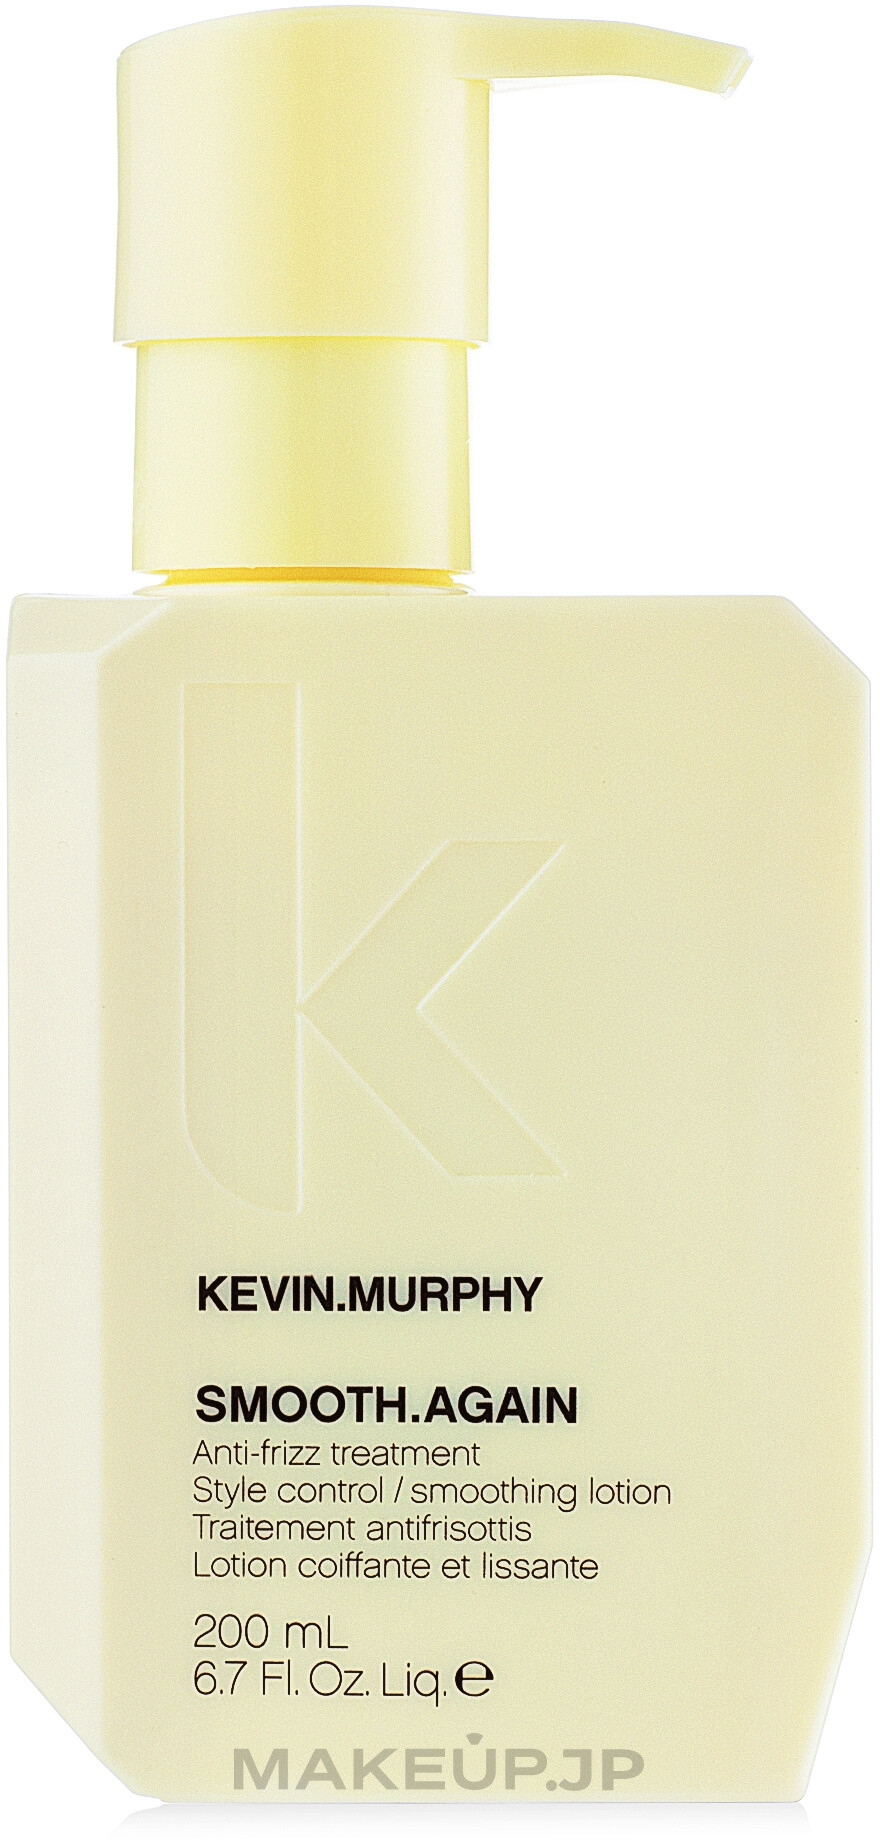 Leave-In Anti-Frizz Treatment - Kevin Murphy Smooth.Again Anti-Frizz Treatment — photo 200 ml